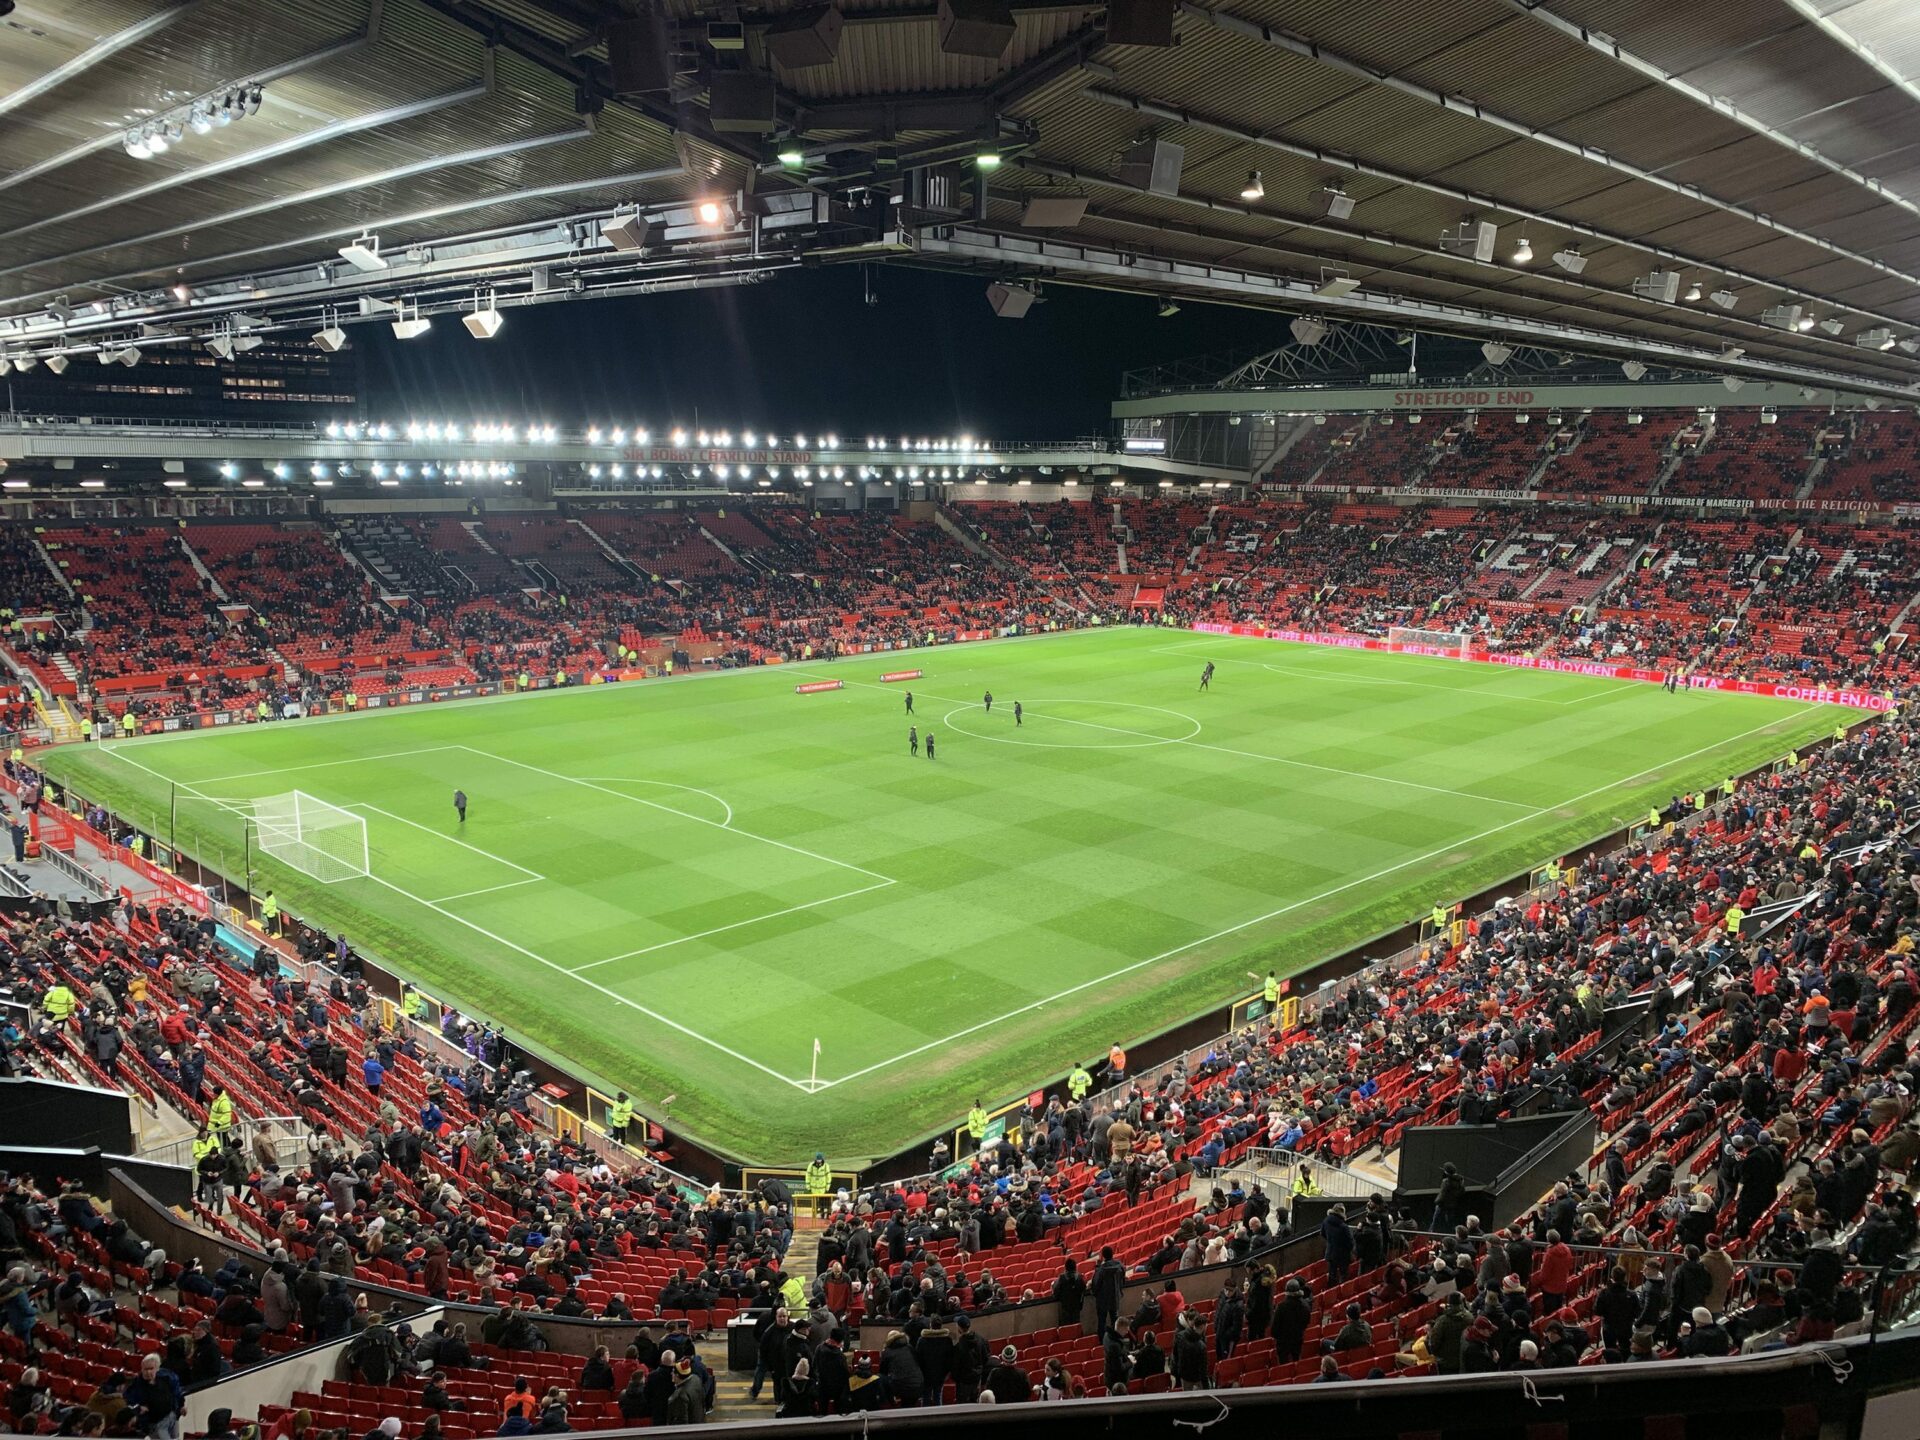 Private box view of the pitch at Old Trafford Stadium mid-game